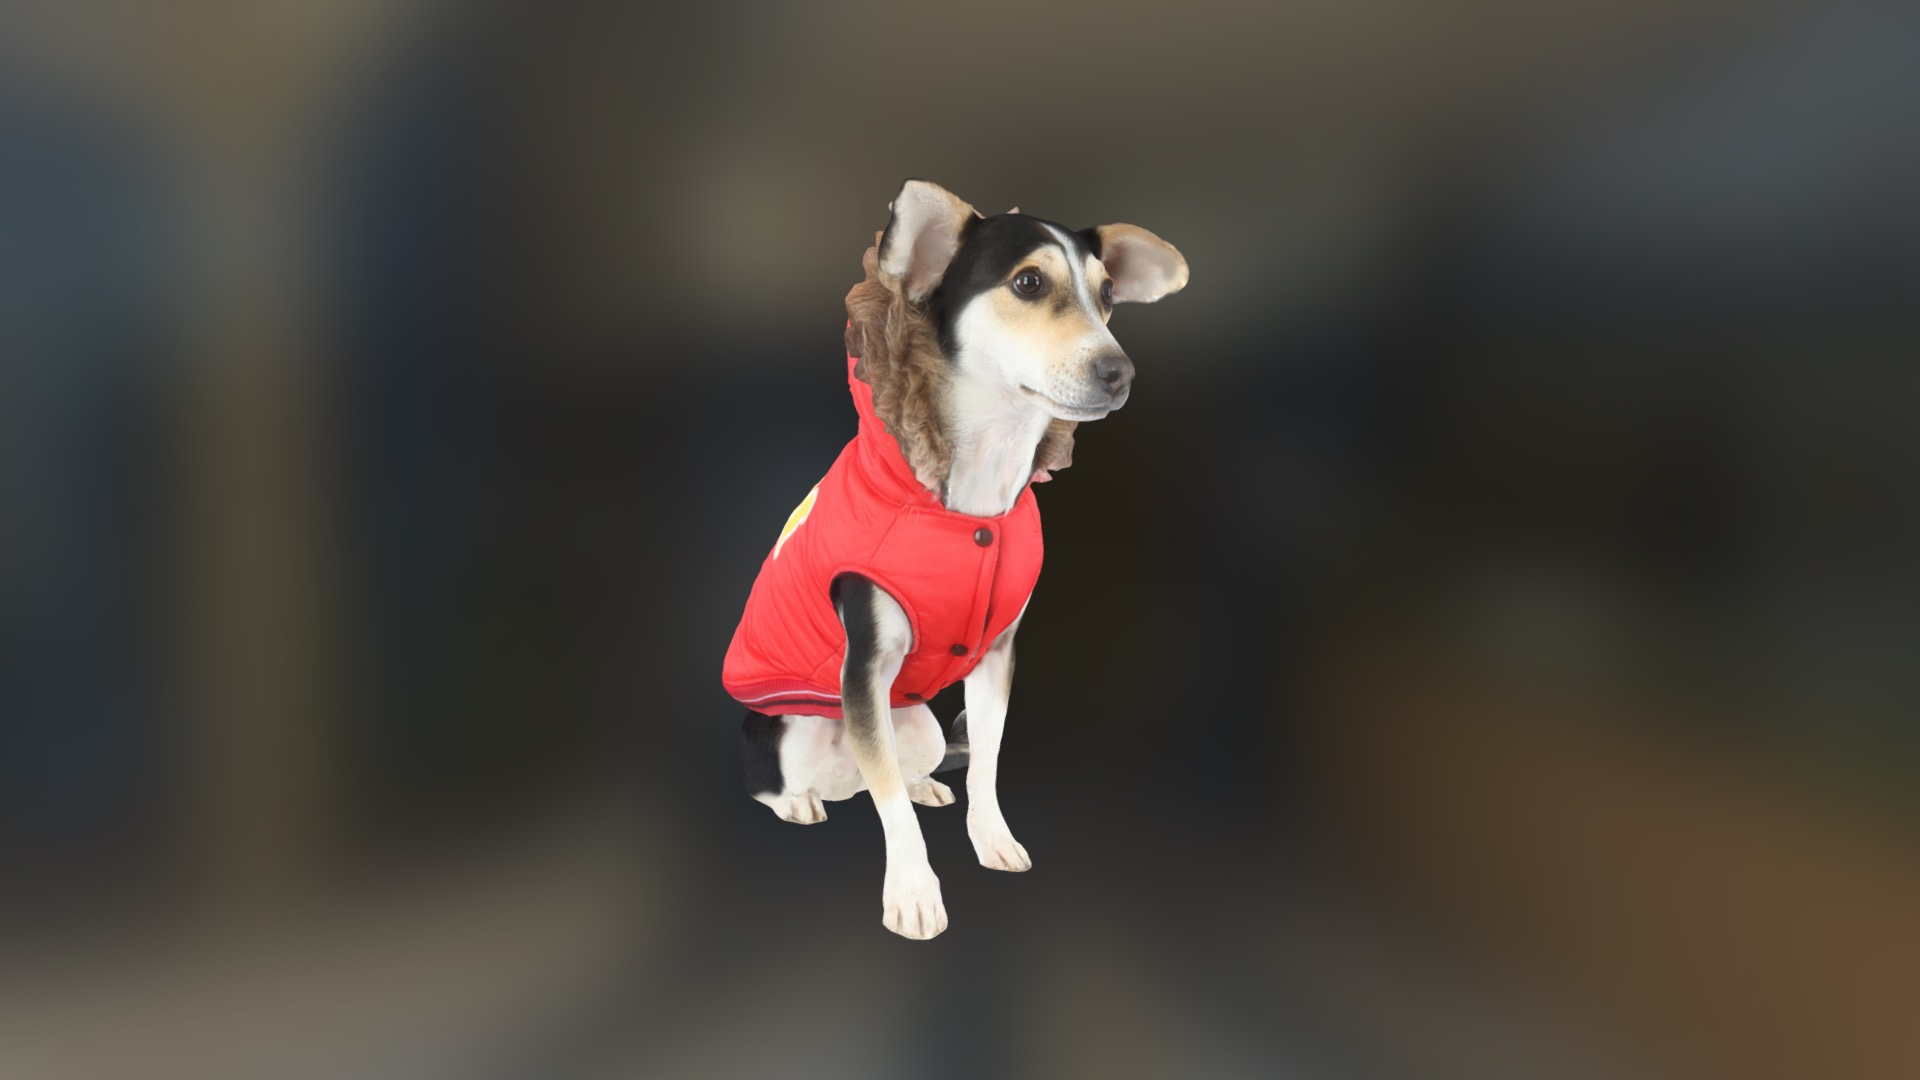 3D model MAX - This is a 3D model of the MAX. The 3D model is about a dog wearing a red shirt.